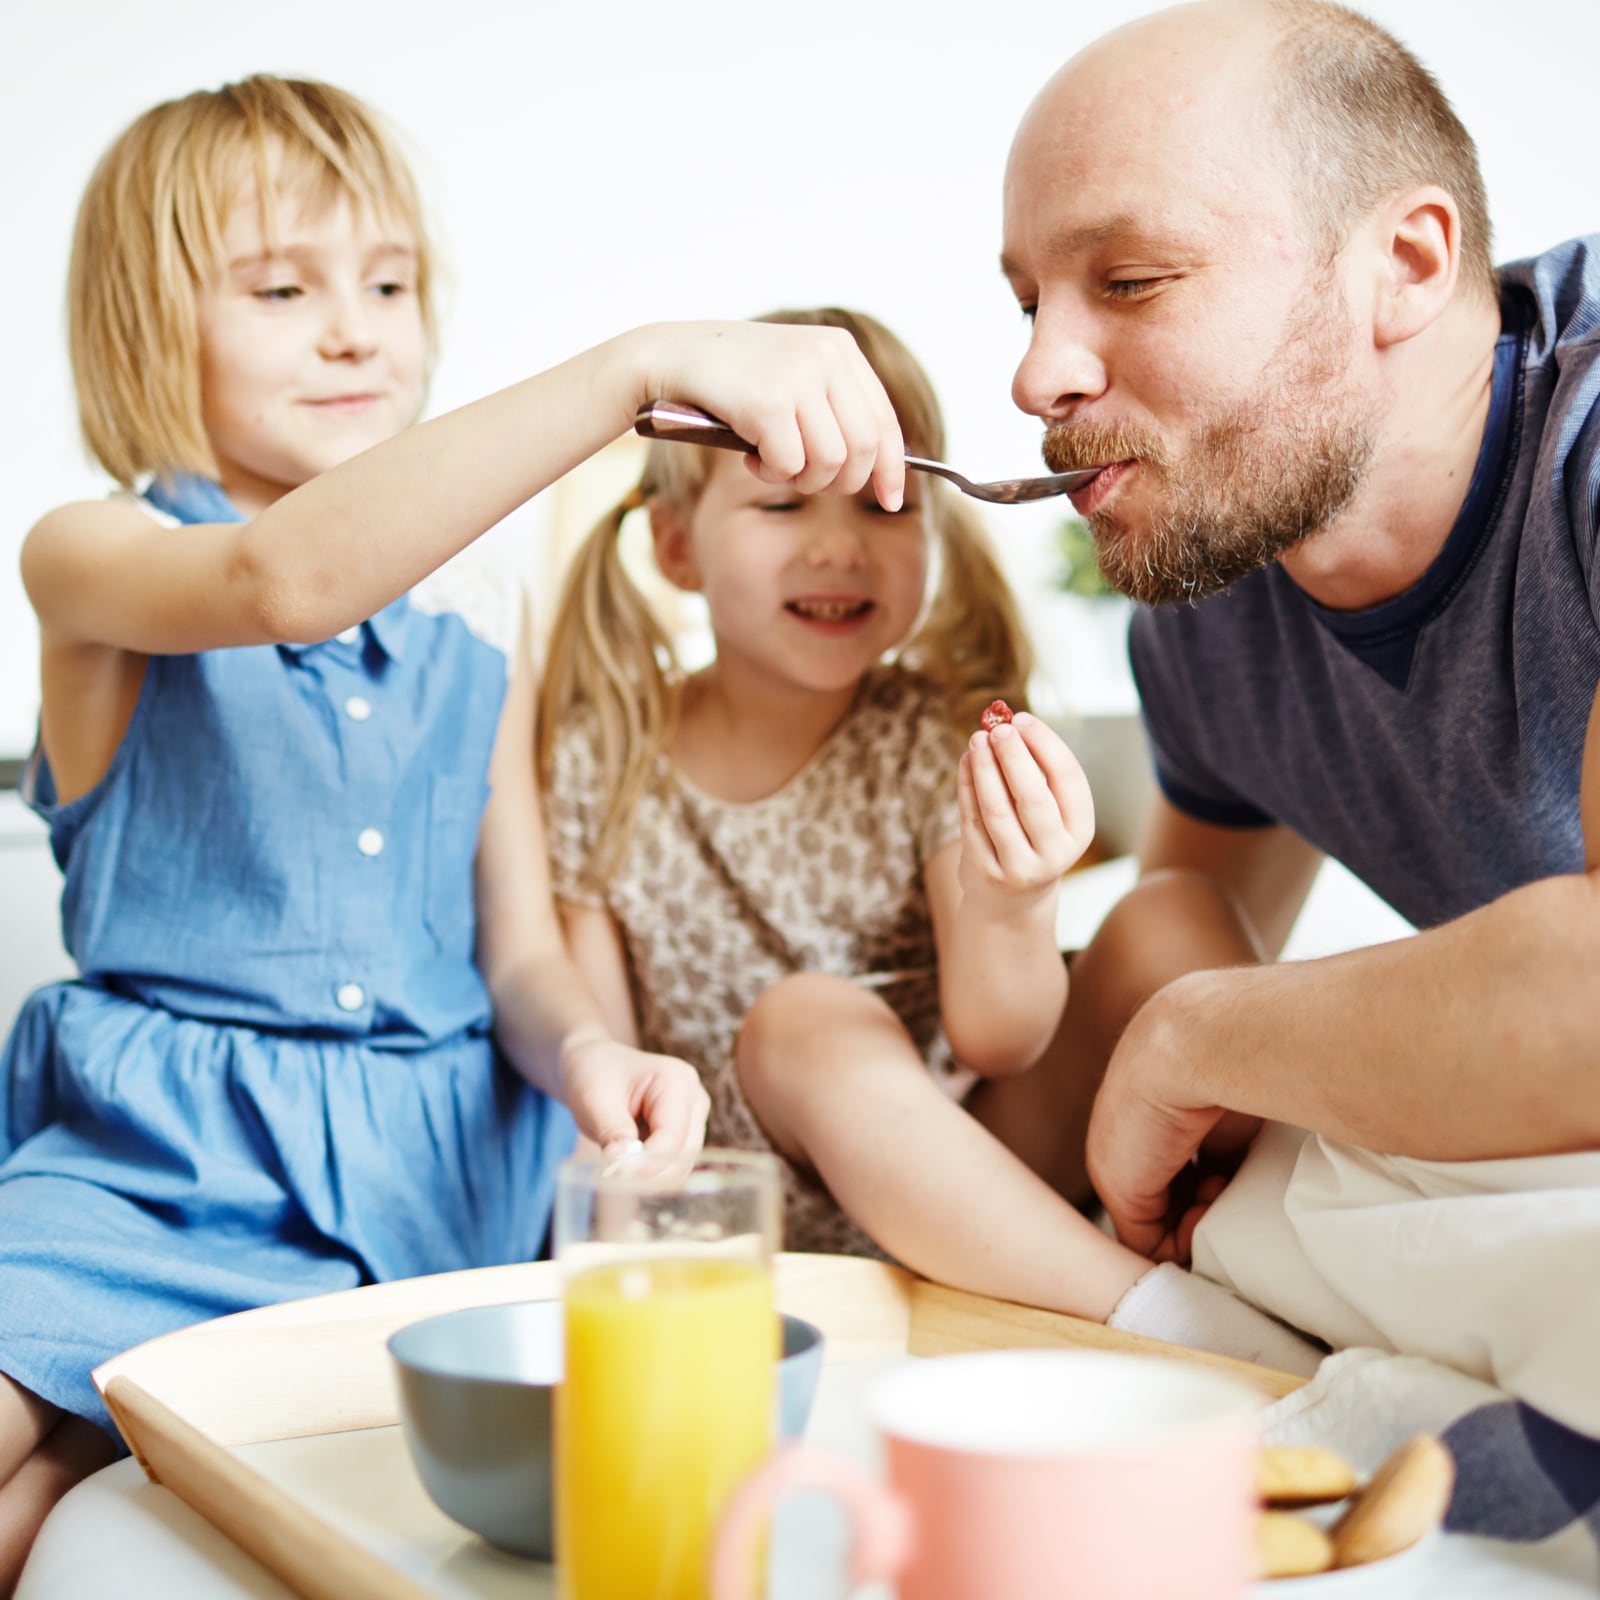 Father's Day 2022: Breakfast in bed is just the right way to start Father's Day. (Representative Image: Shutterstock)